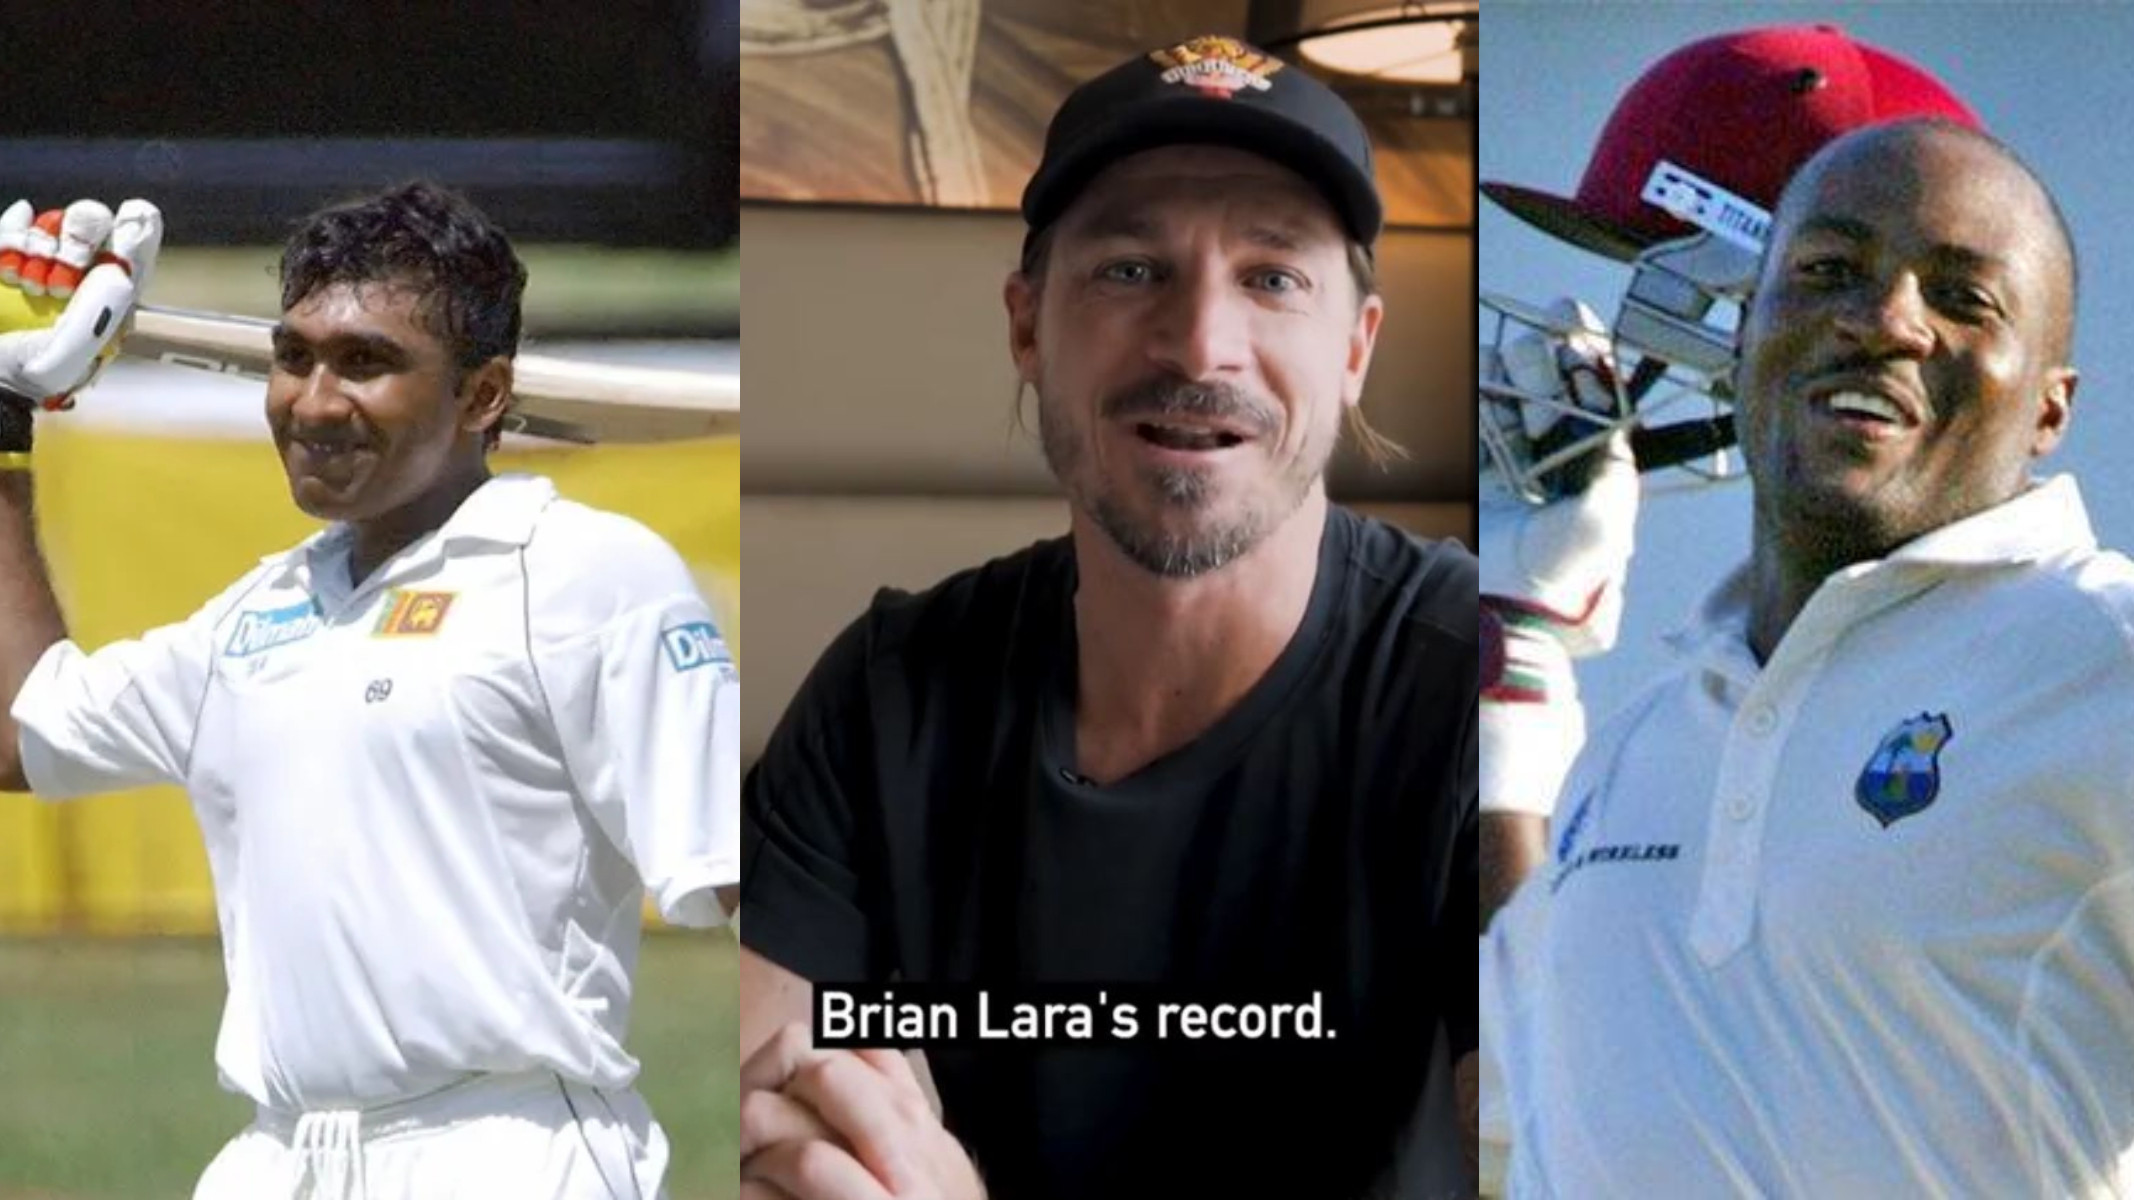 WATCH- 'Looked at Lara and said you're welcome'- Dale Steyn recalls how South Africa saved Lara’s record of 400*